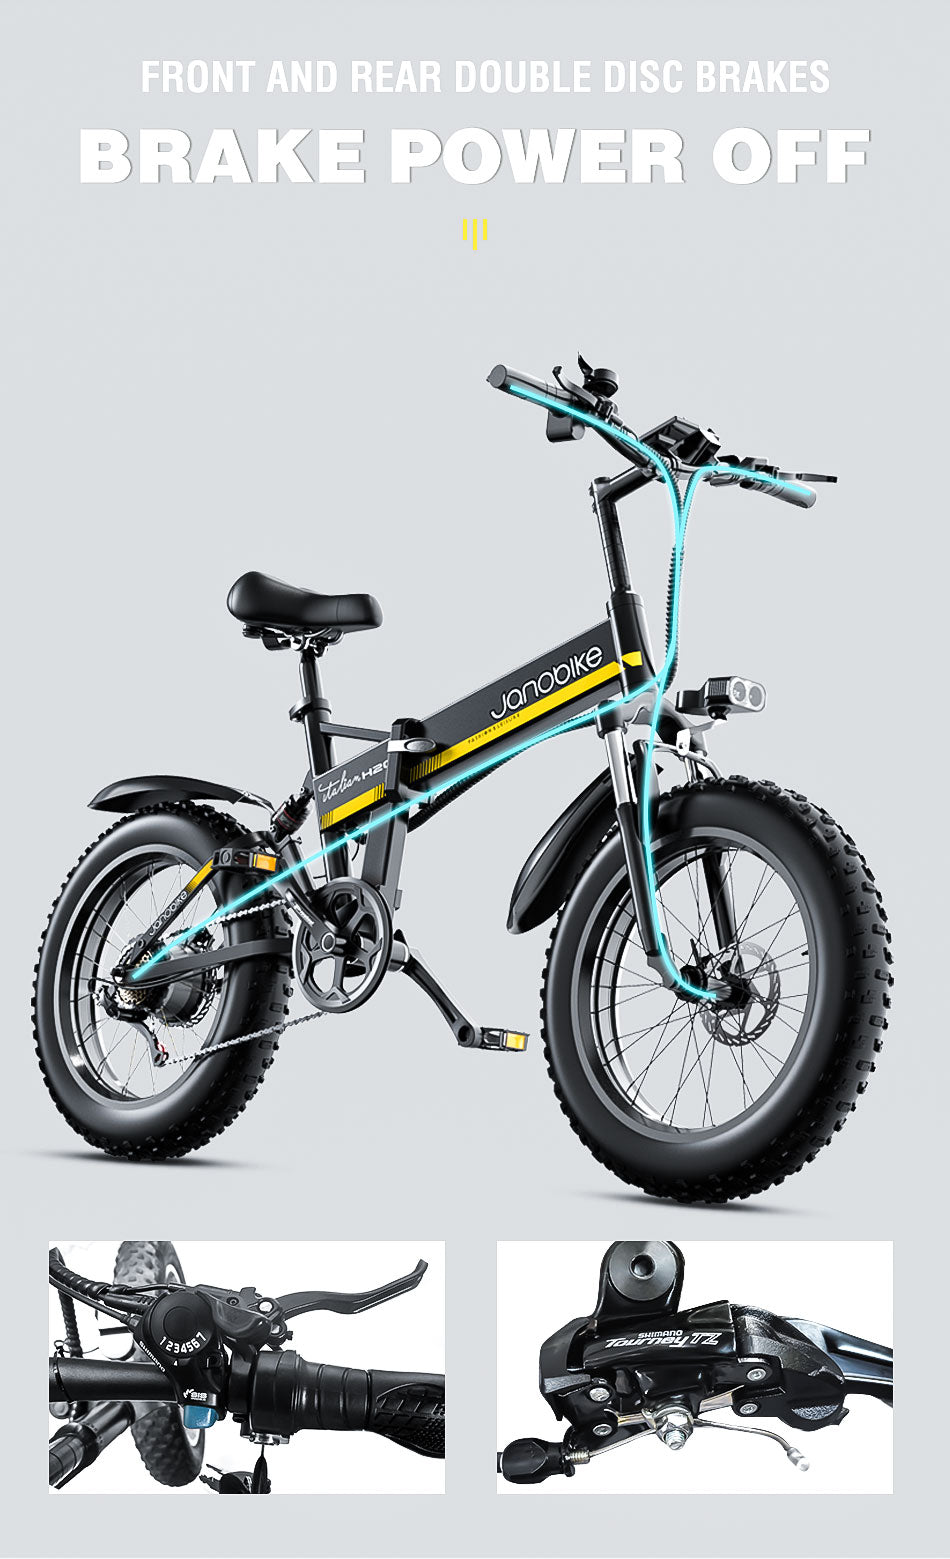 Janobike H20 Ebike. FRONT AND REAR DOUBLE DISC BRAKES - BRAKE POWER OFF